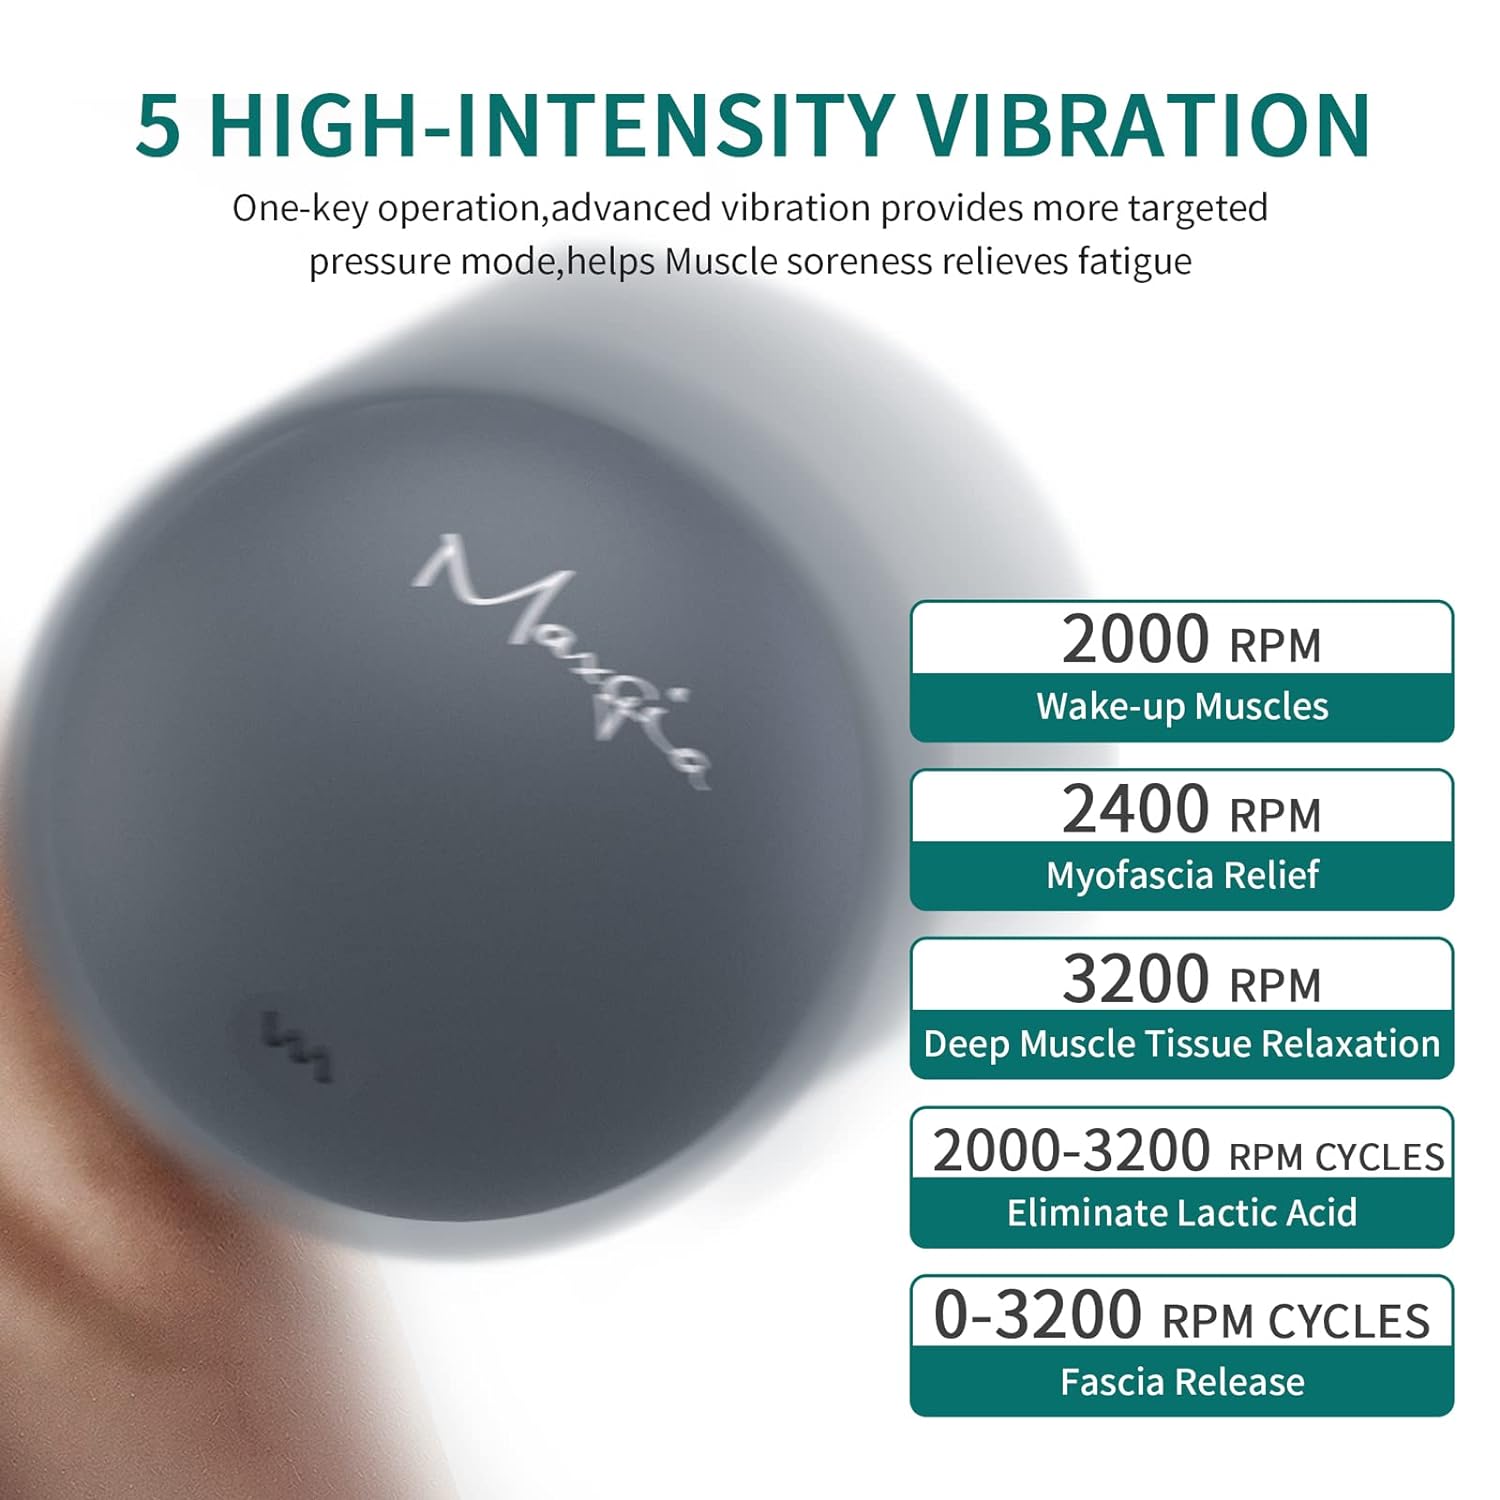 Vibrating Massage Ball 5 Speed Yoga Massage Roller with Vibration Electric Massaging Balls Deep Tissue Massager Ball Relieve Muscle Tension Pain (Gray)